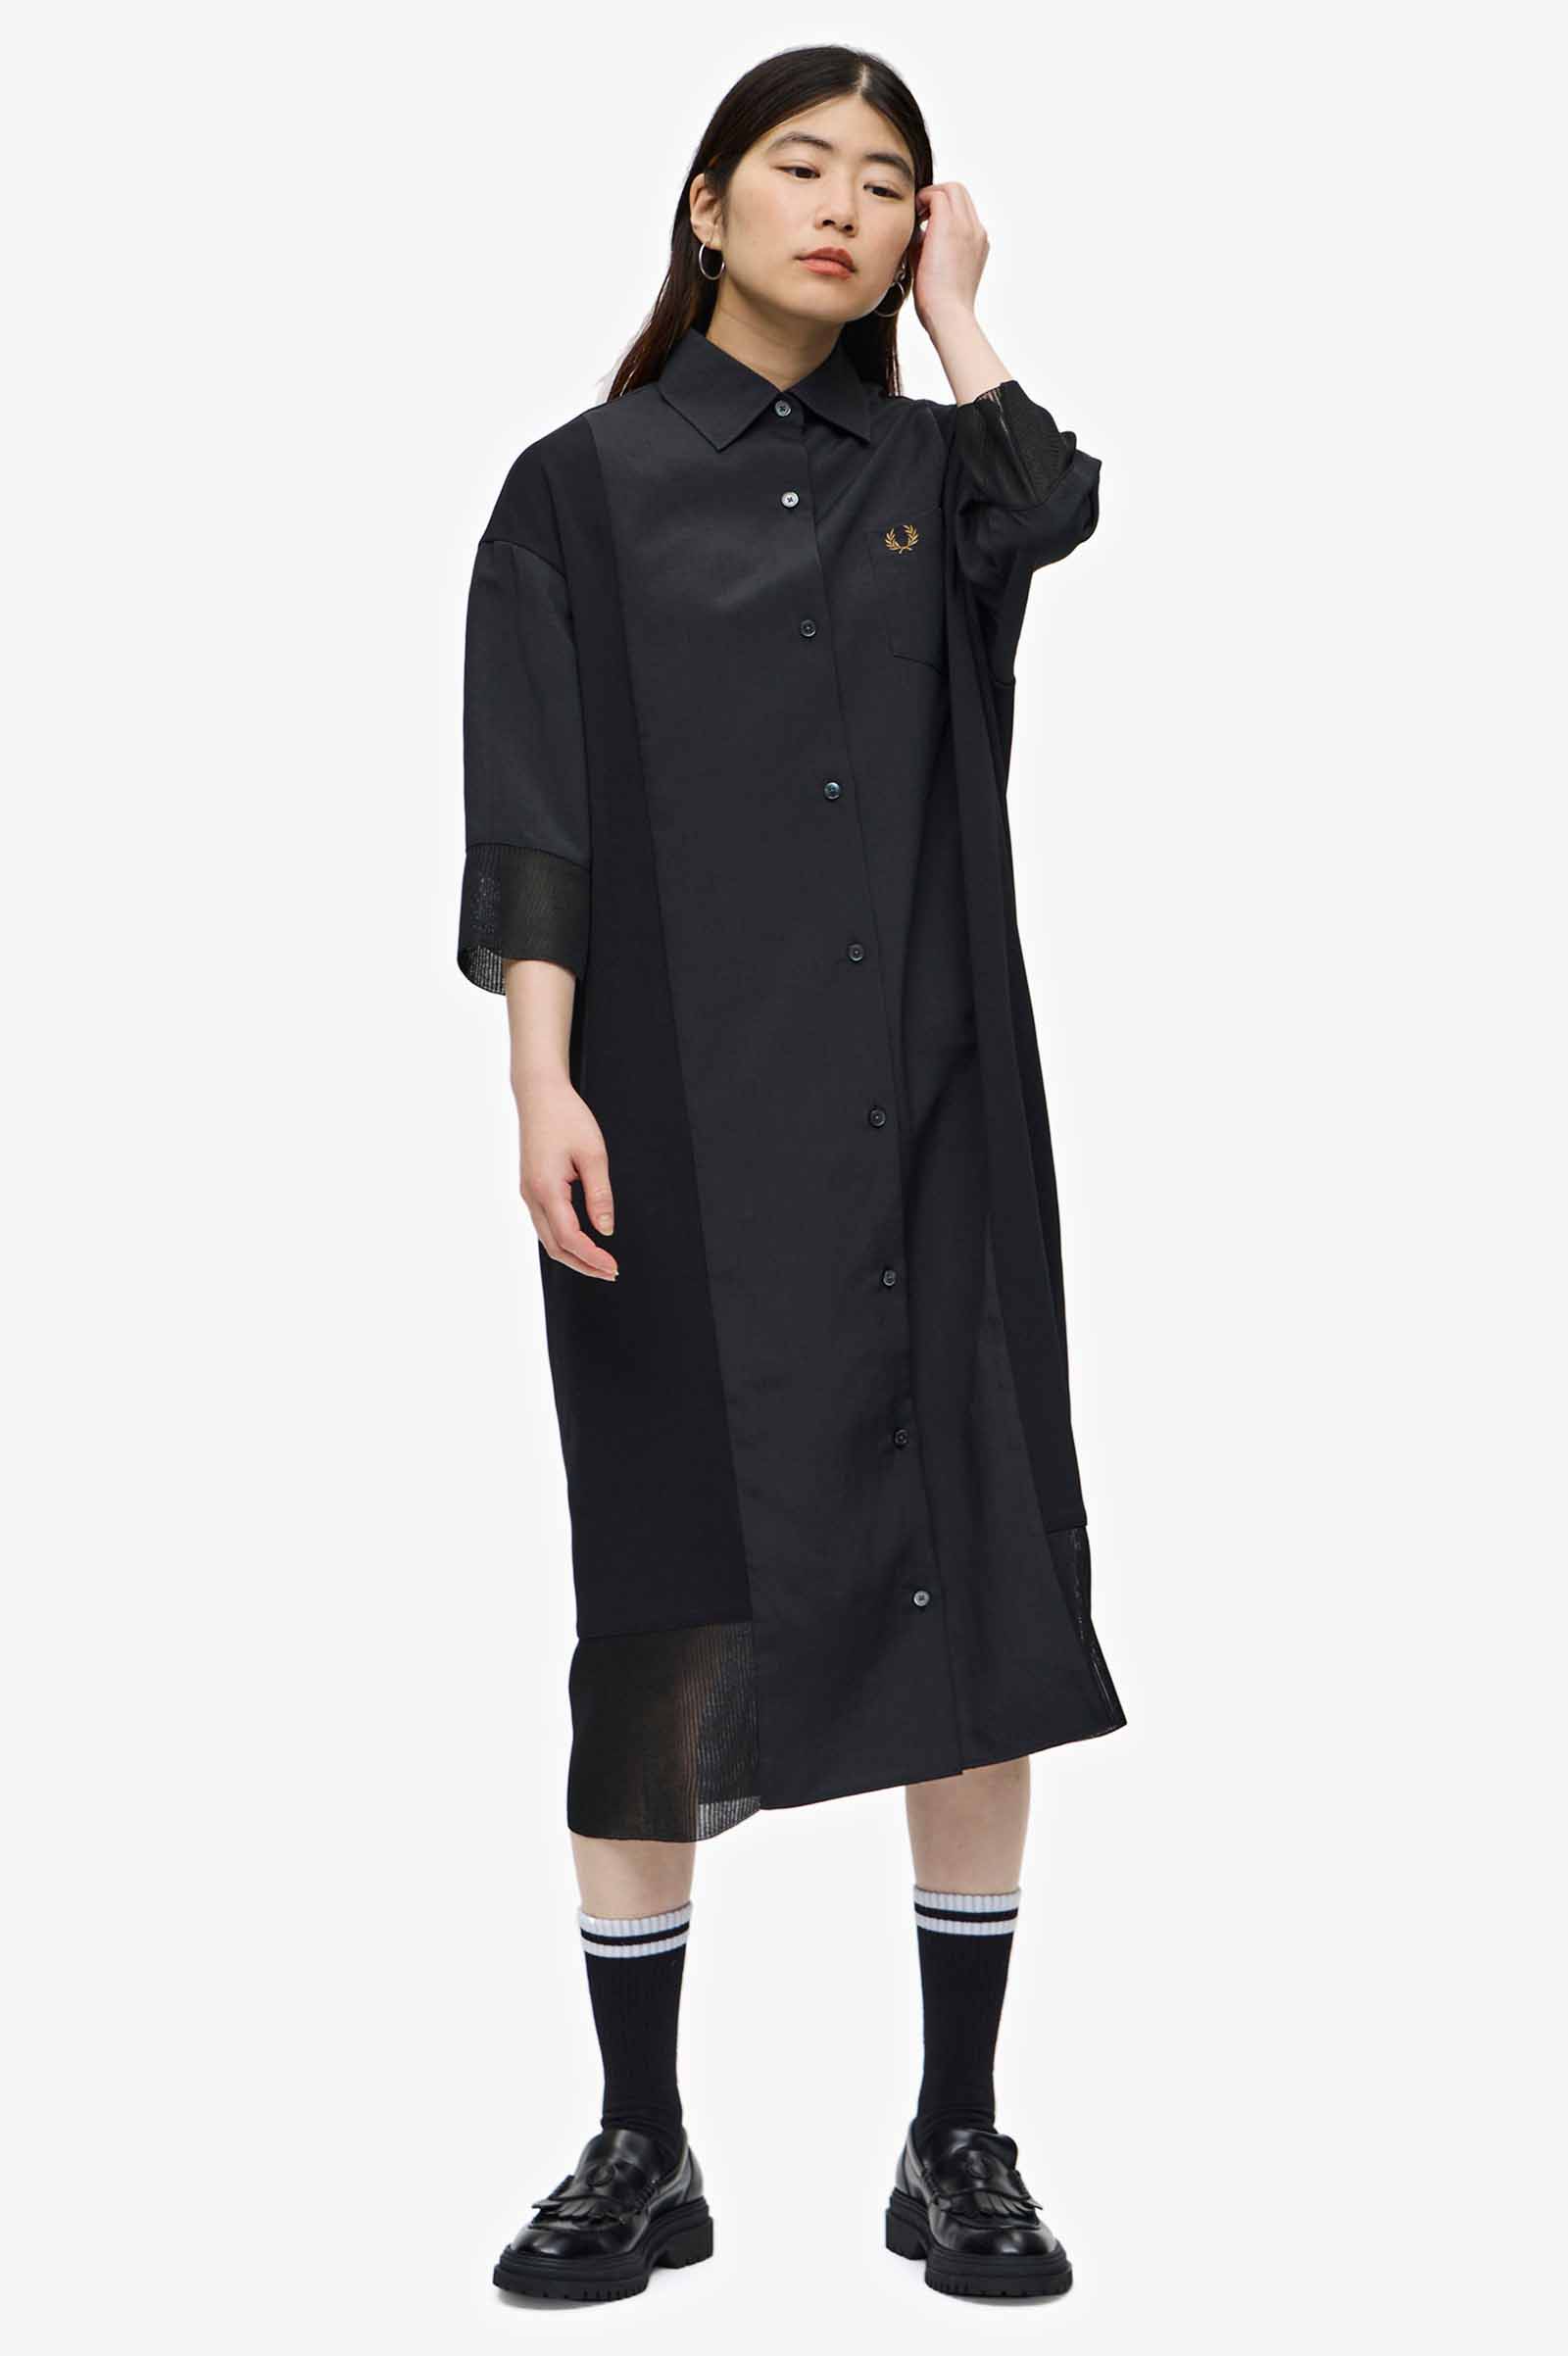 FRED PERRY / high neck jacquard dress